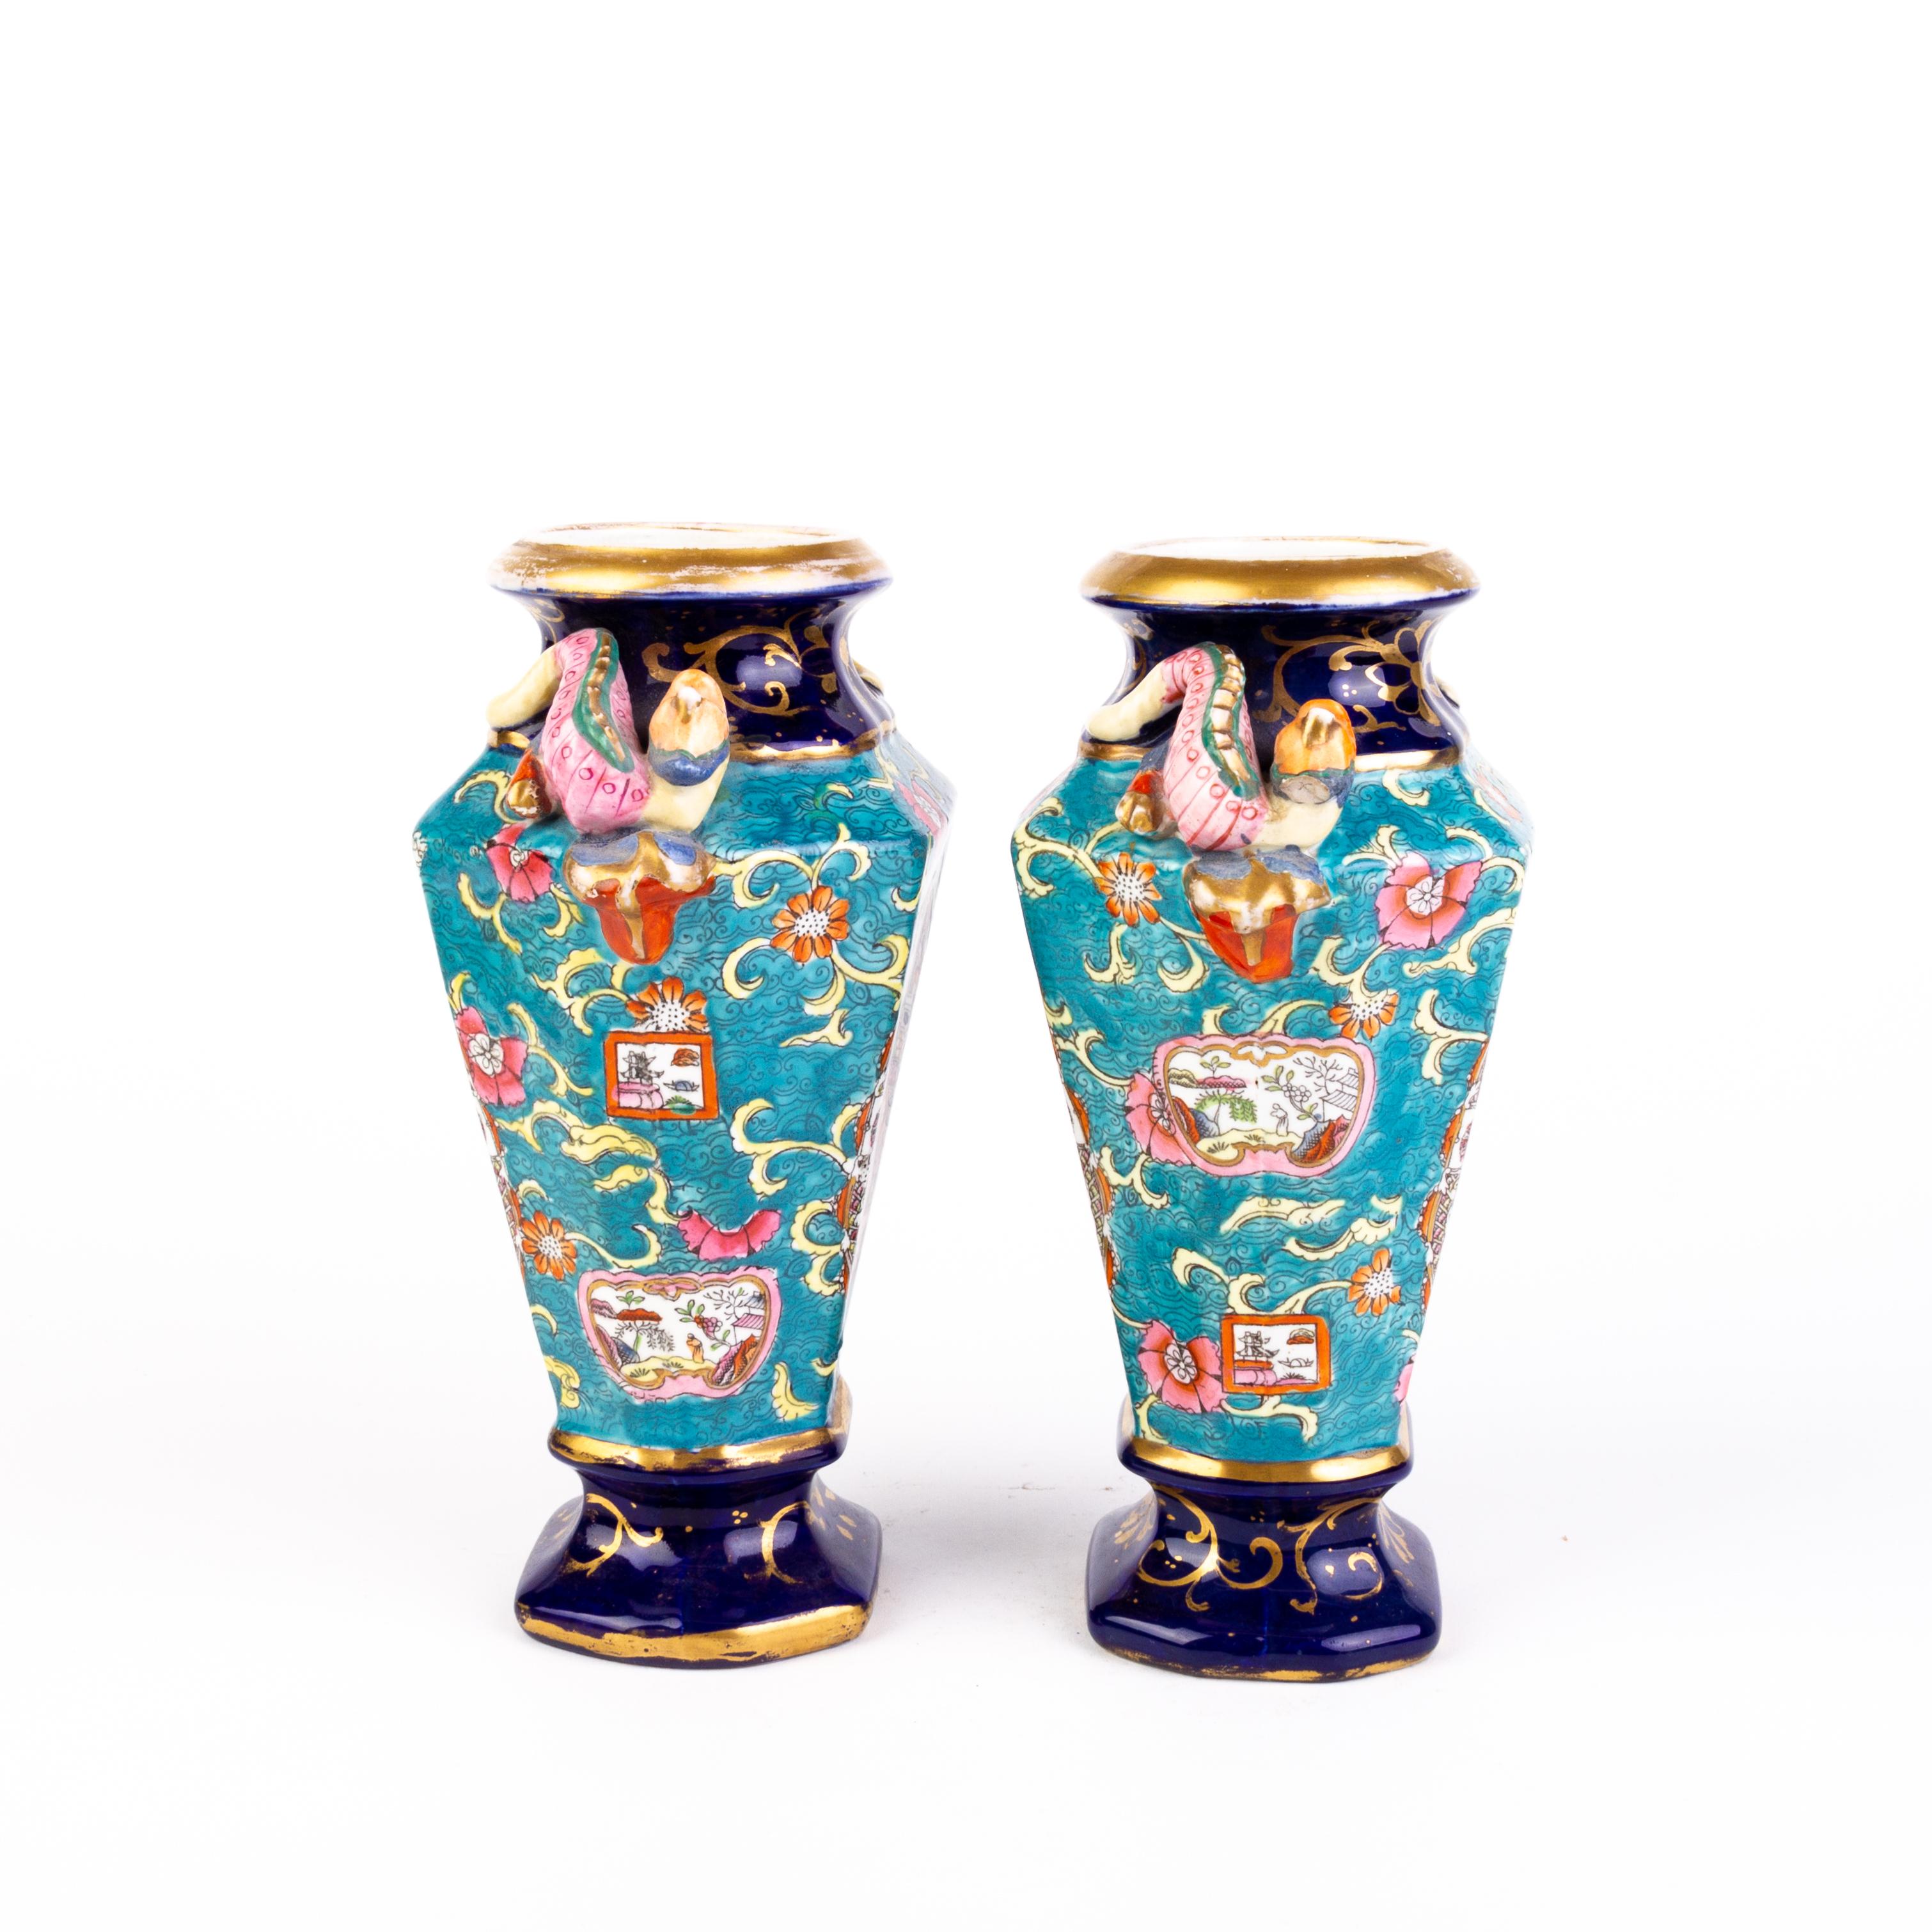 Pair of Chinese Famille Rose Porcelain Seal Baluster Vases 
Good condition
From a private collection.
Free international shipping.